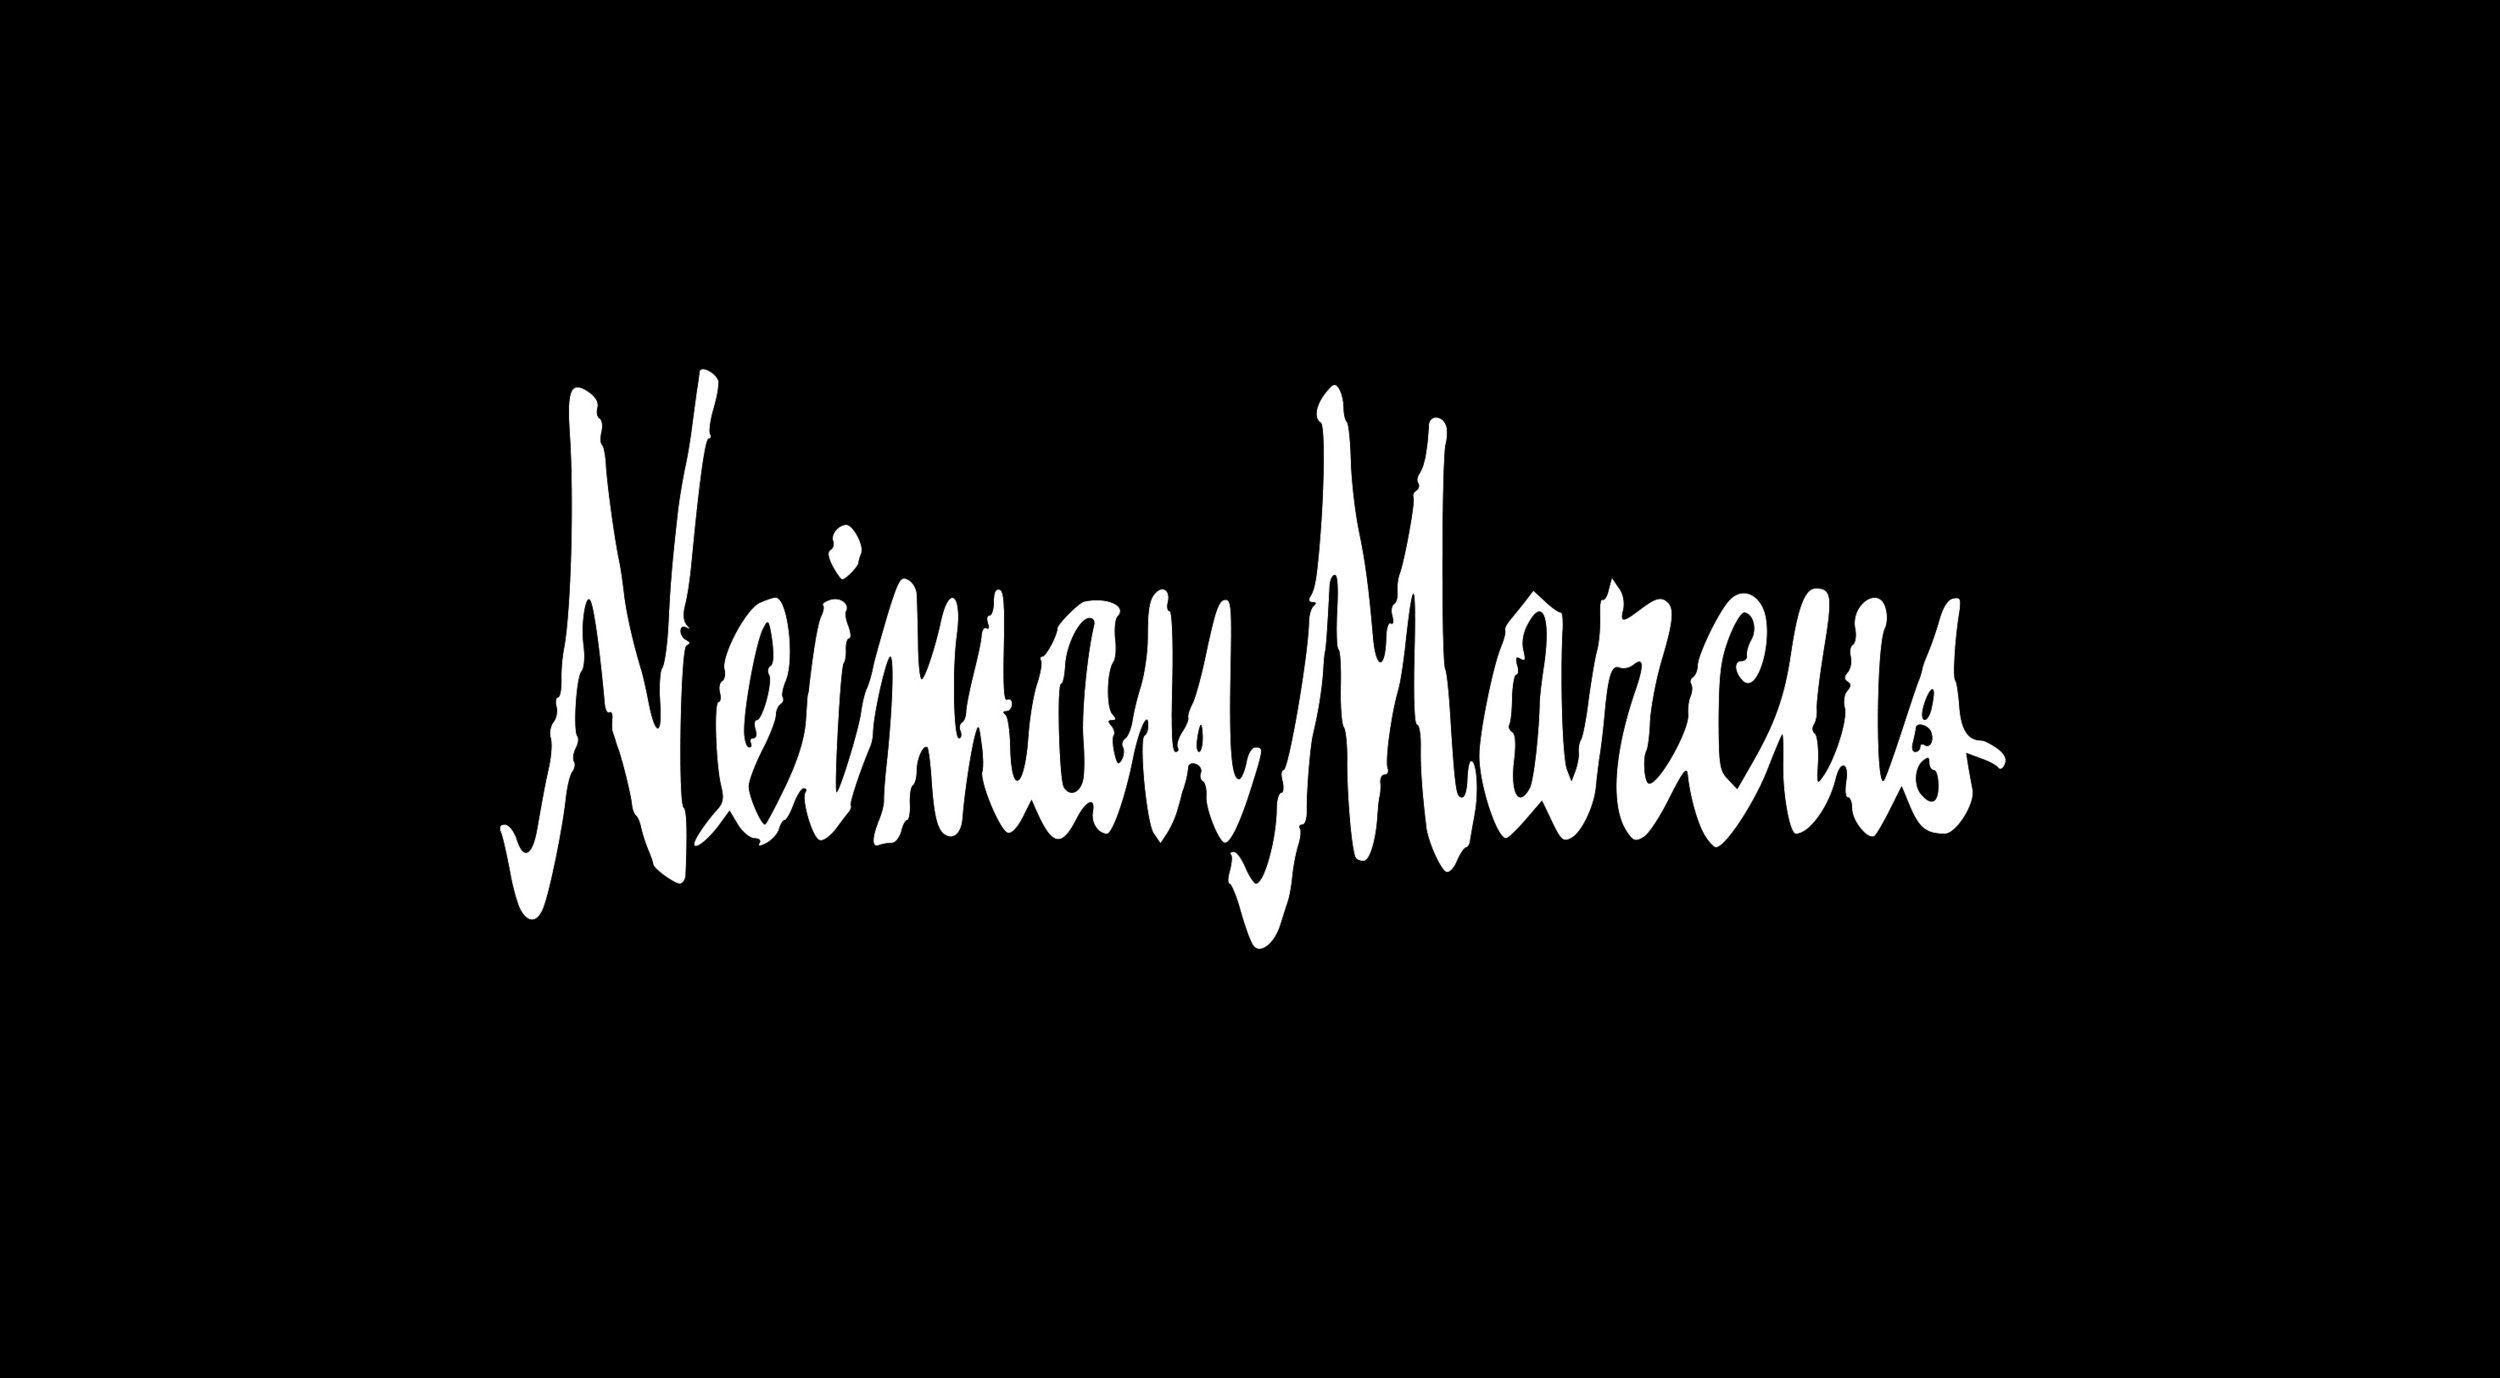 Enjoy a Downtown Neiman Marcus Experience